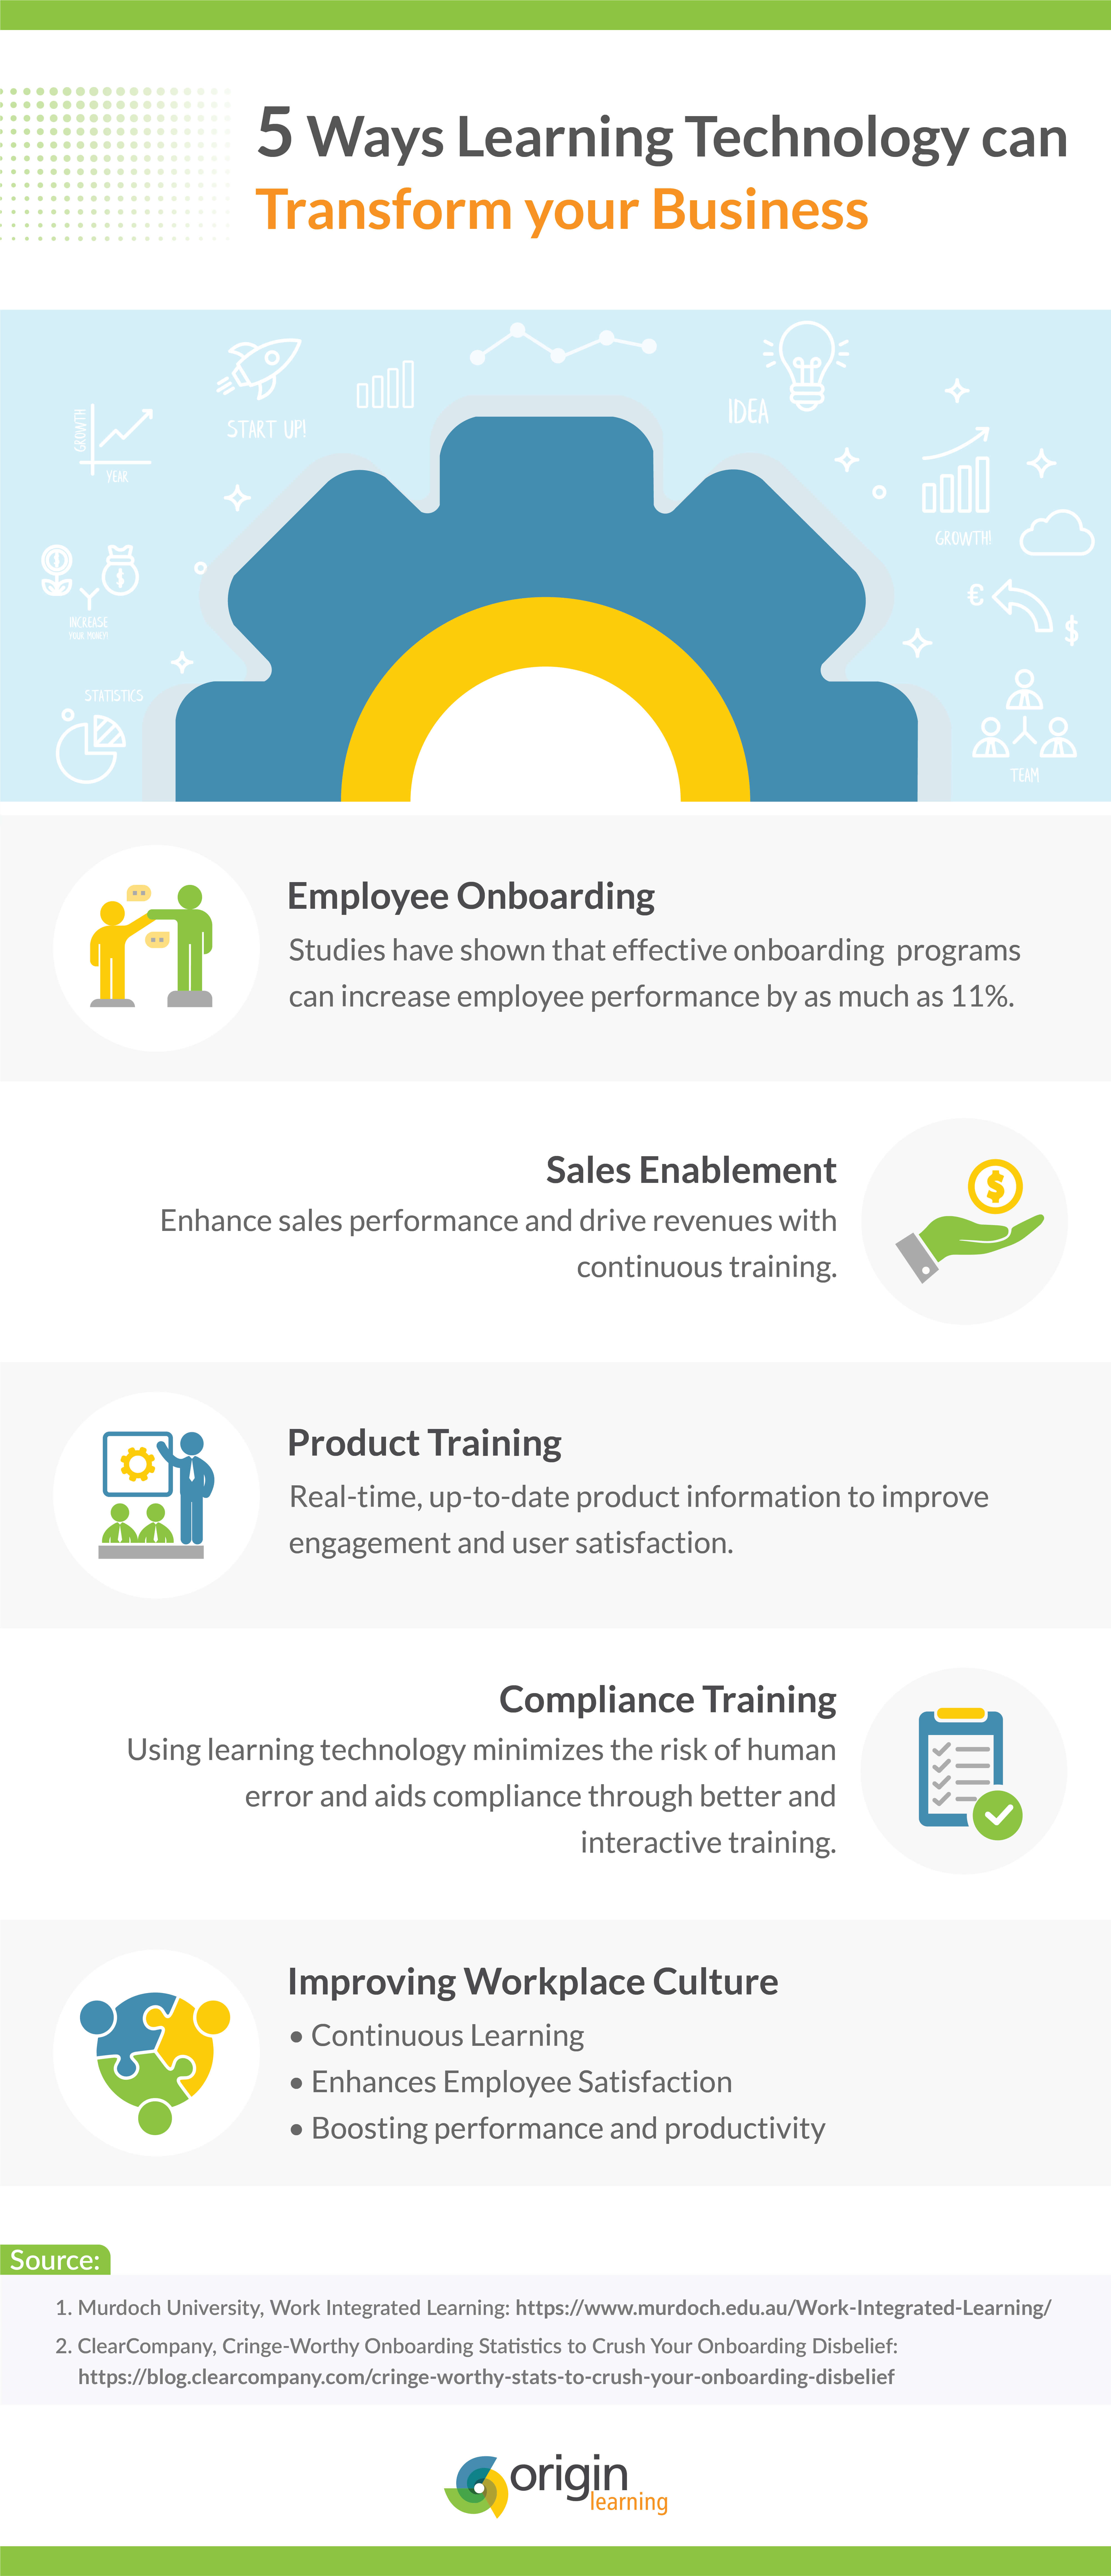 6 ways Learning Technology can transform your business